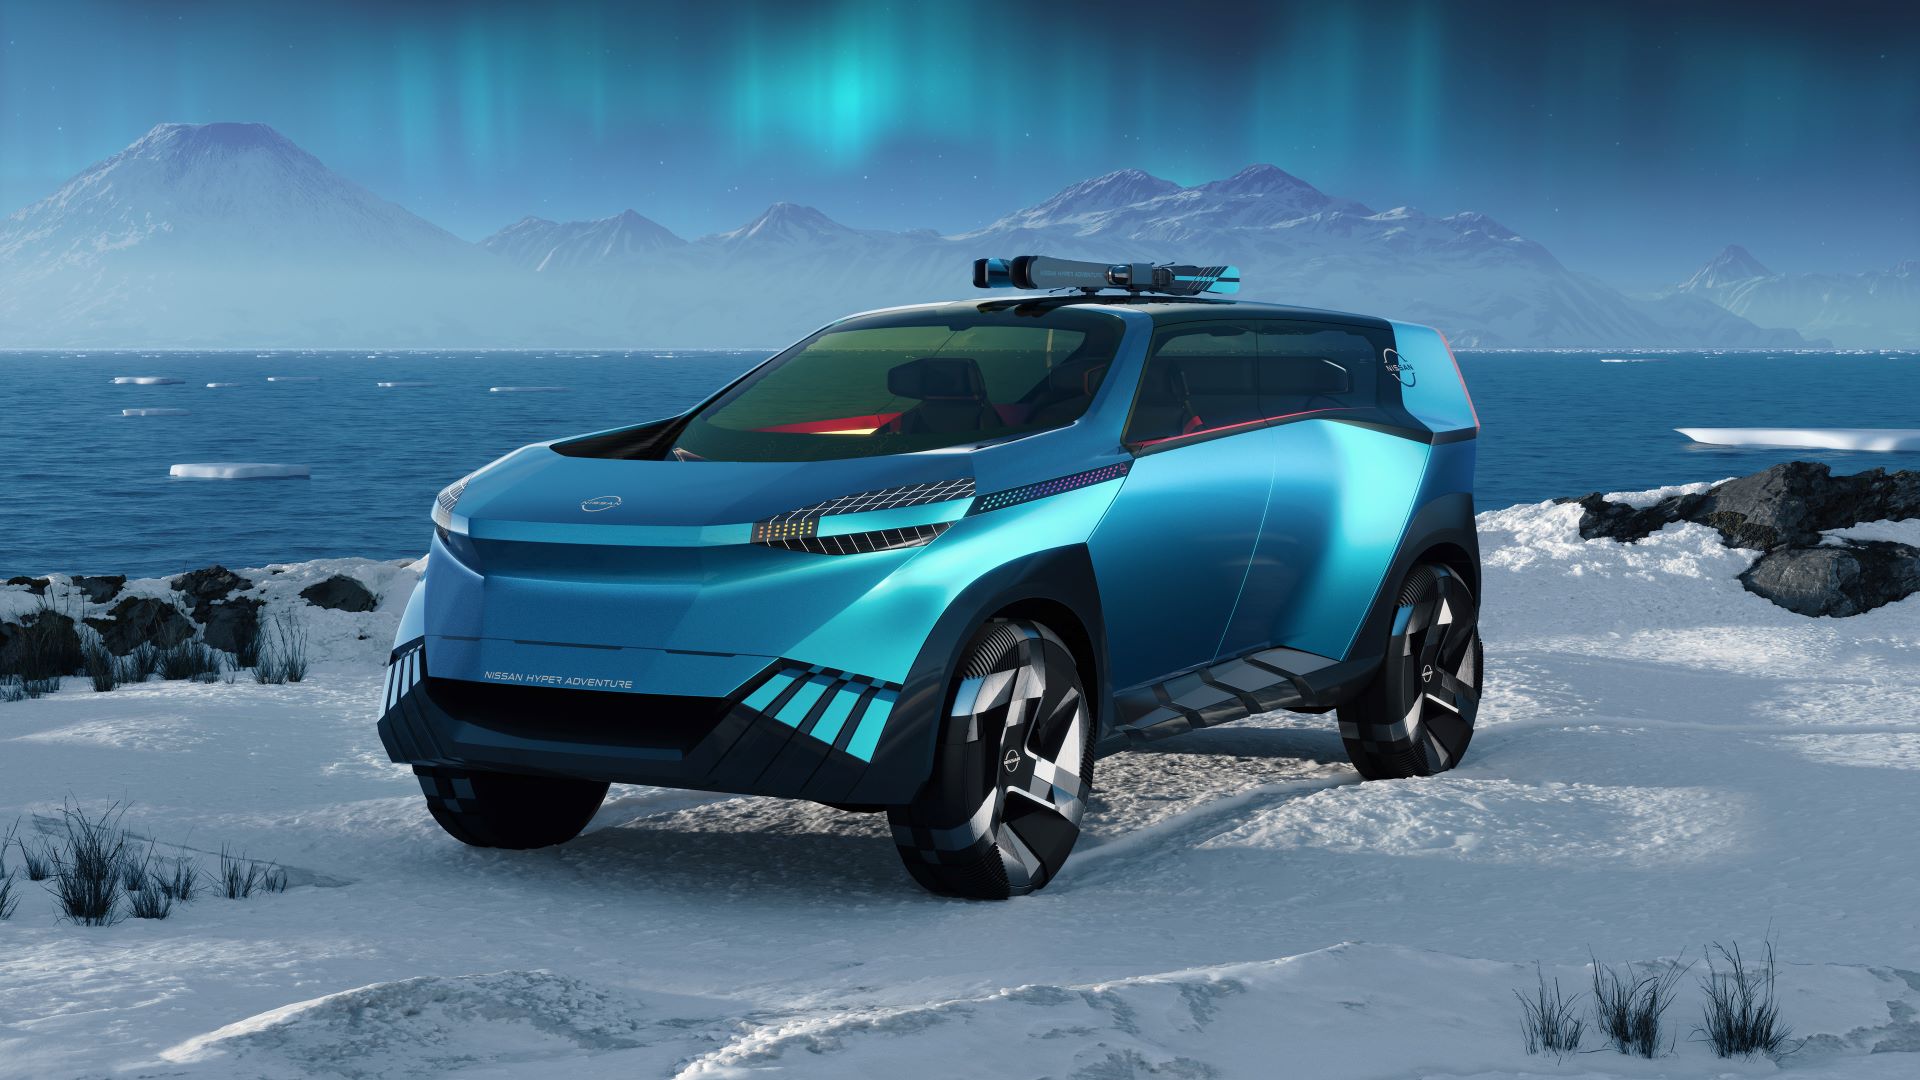 Nissan unveils the Nissan Hyper Adventure concept, outfitted for eco-minded outdoor travellers